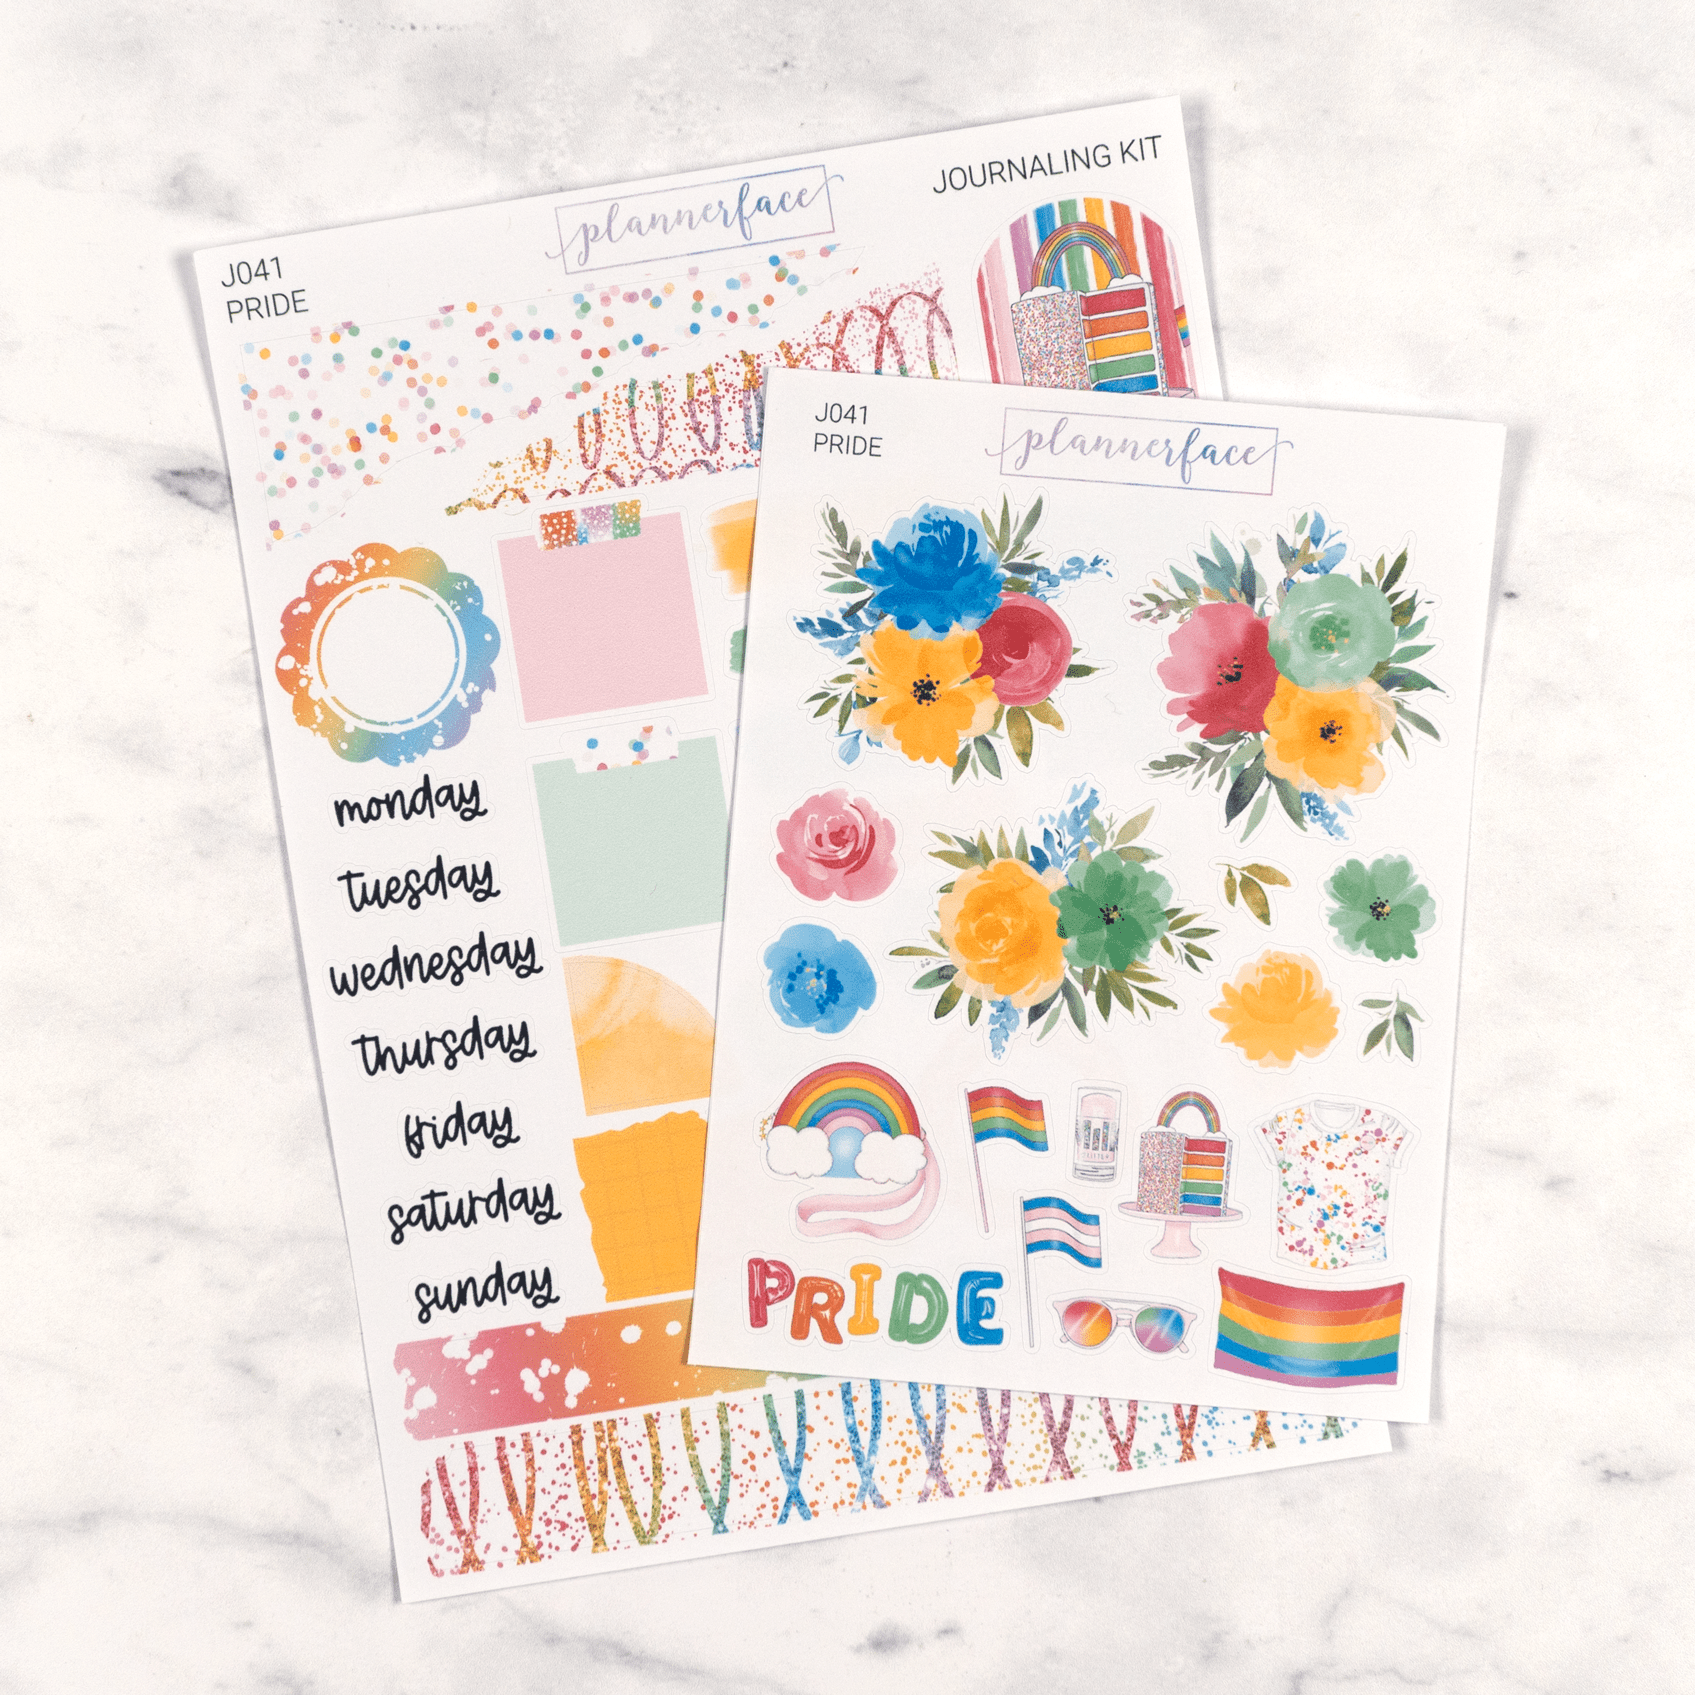 Pride | Journaling Kit by Plannerface